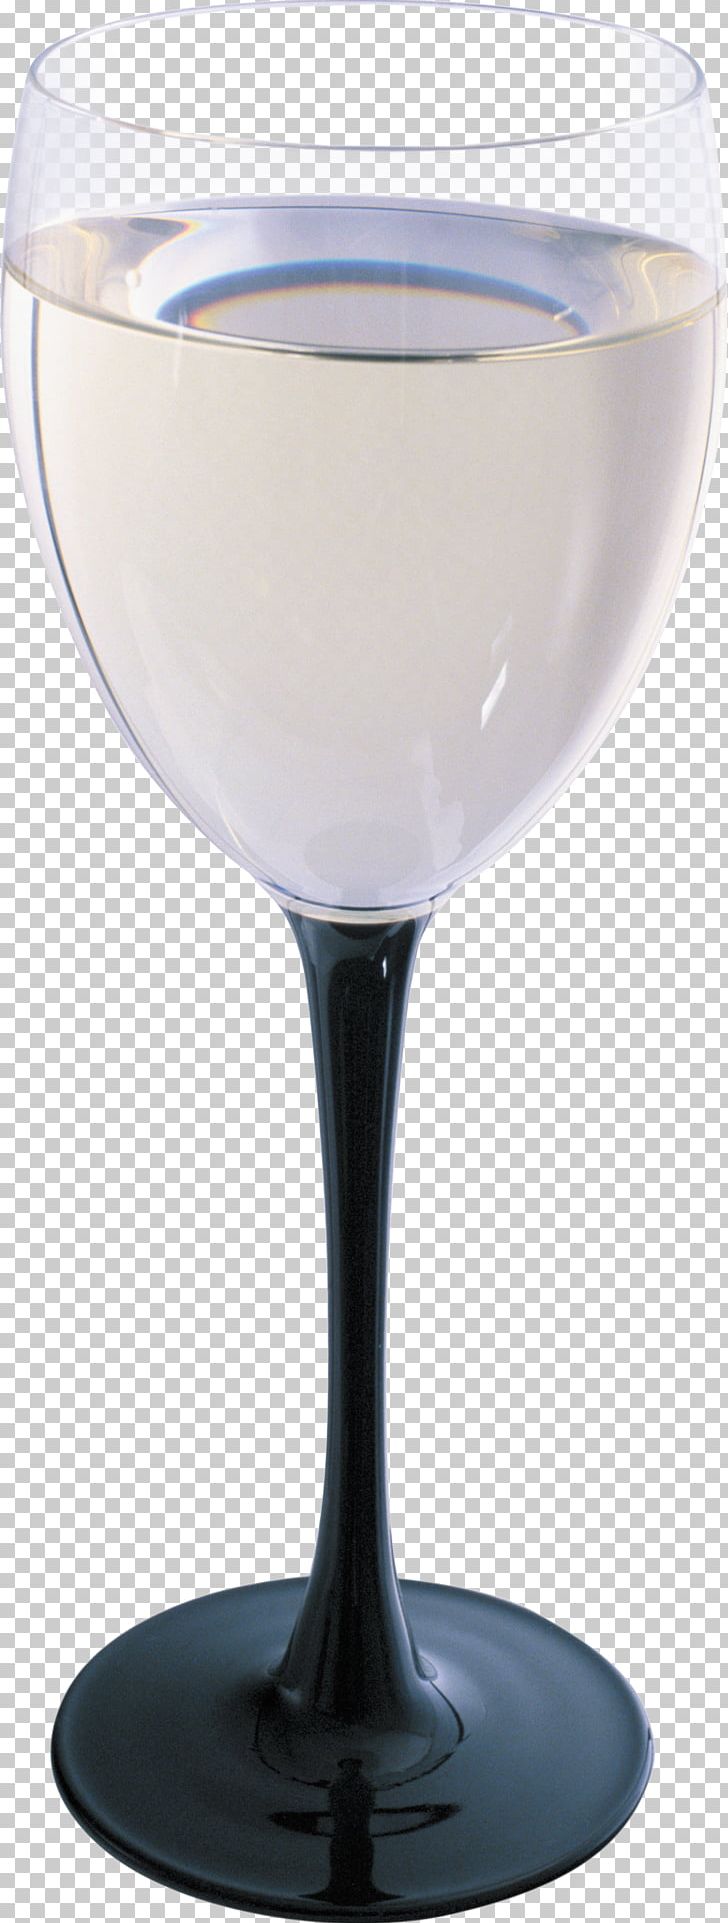 Cocktail Wine Glass Champagne Martini PNG, Clipart, Champagne Glass, Champagne Stemware, Cocktail, Cocktail Glass, Drink Free PNG Download